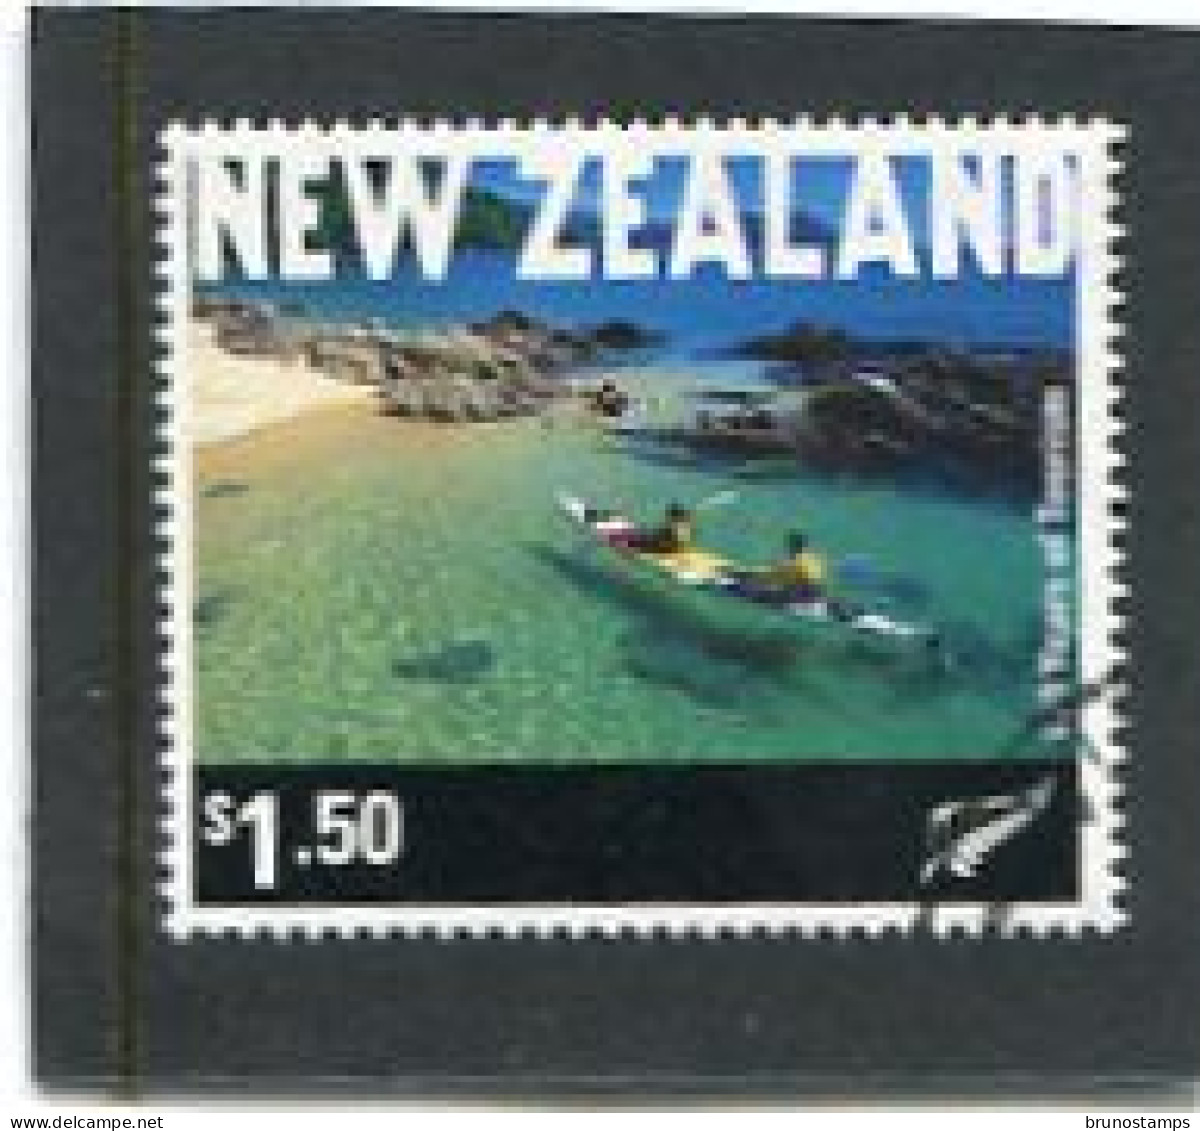 NEW ZEALAND - 2001  1.50$  TOURISM  FINE  USED - Used Stamps